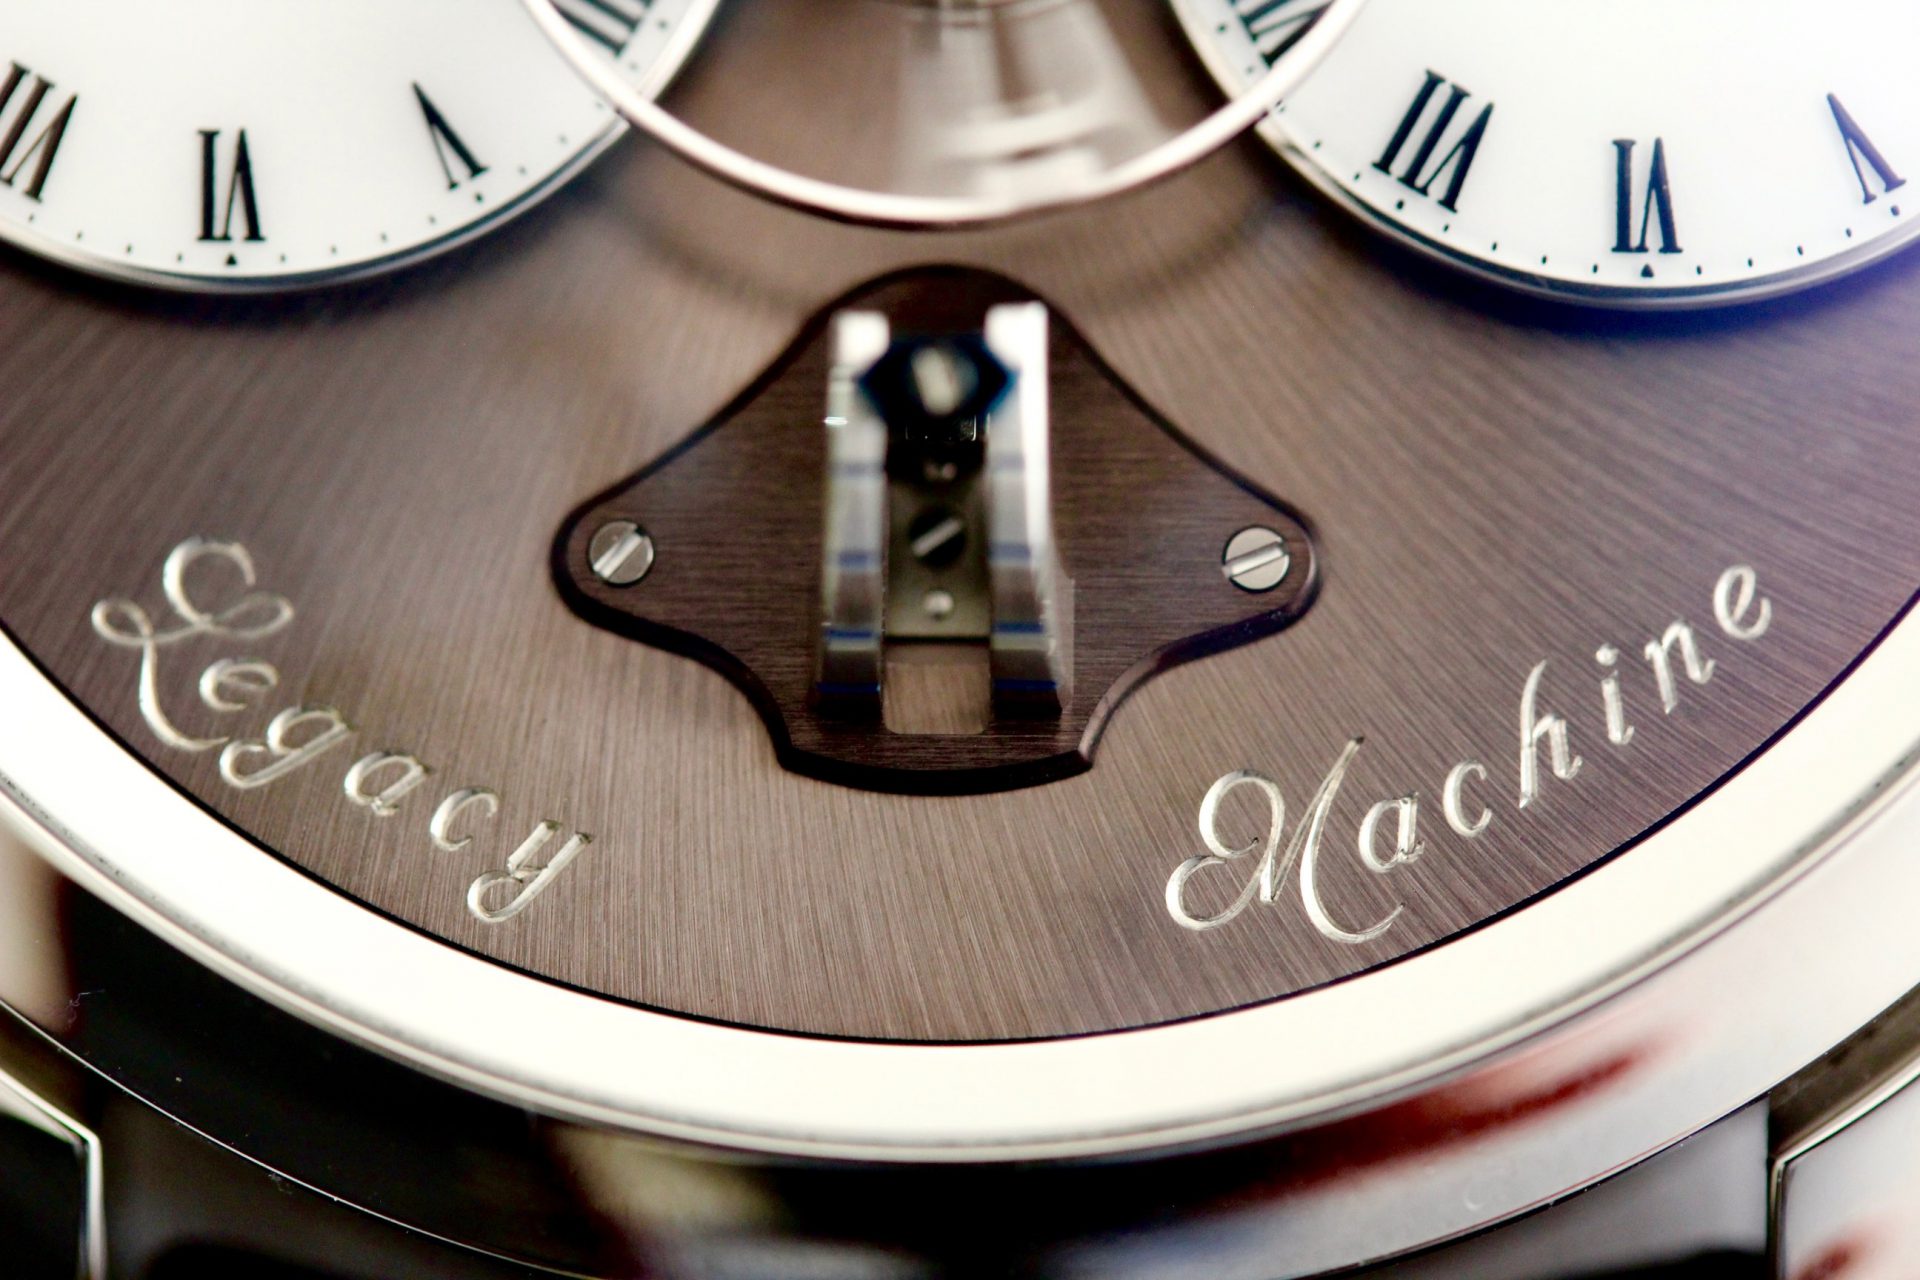 Legacy Machine no. 1 by MB&F - Luxury Watchmaking